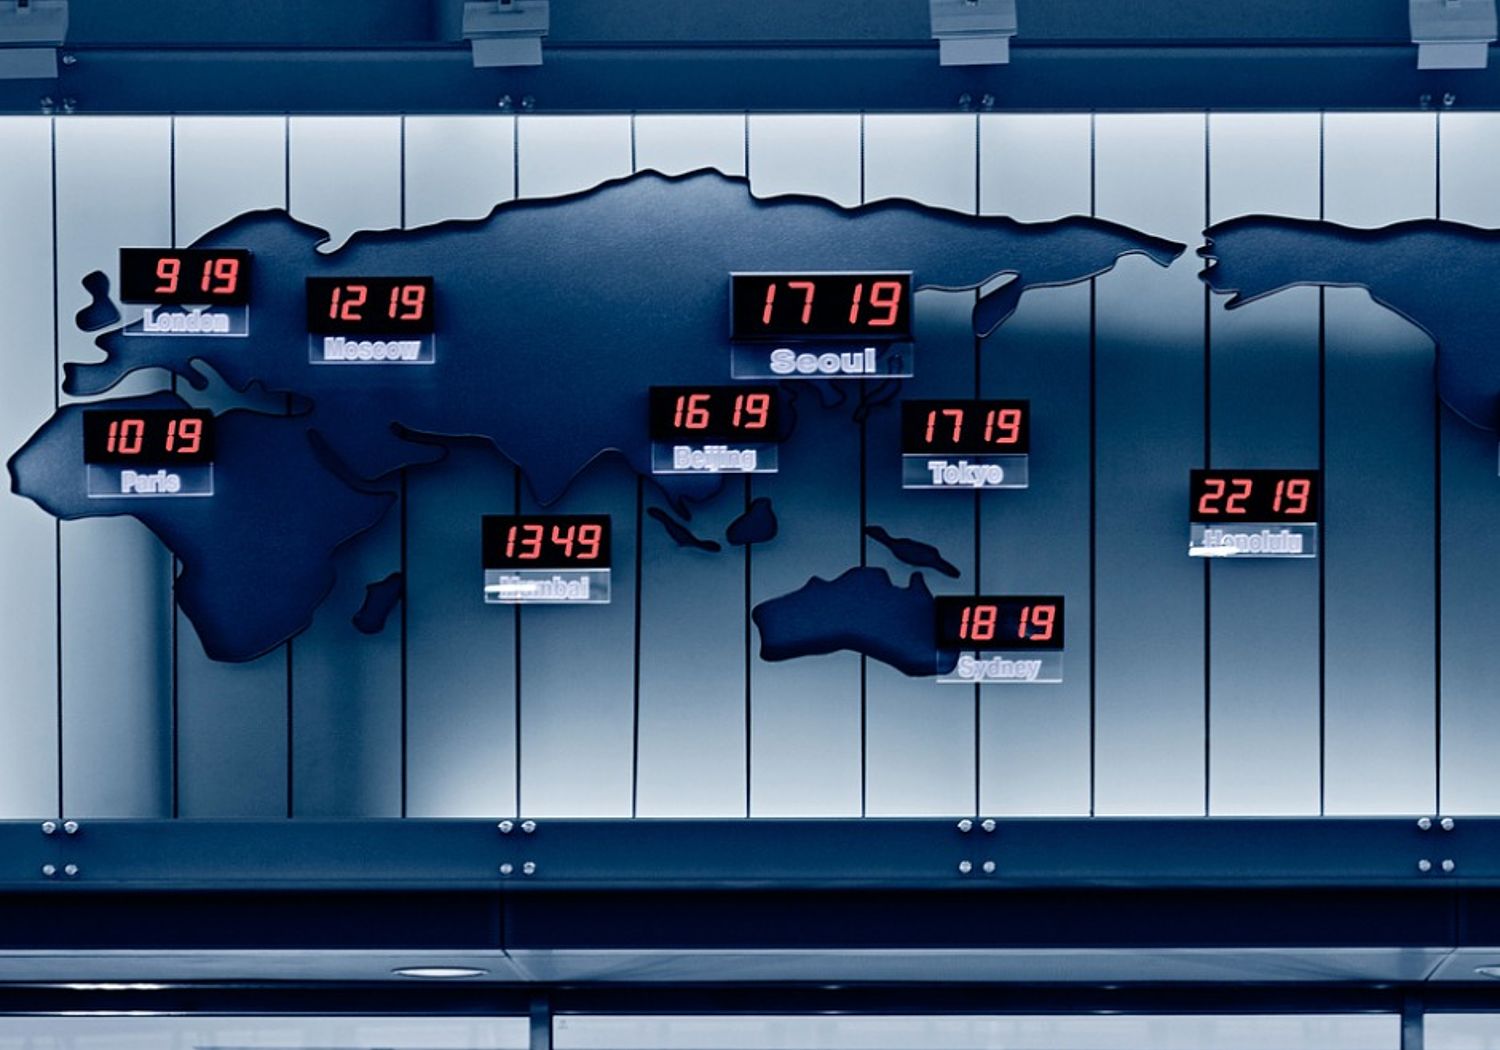 Image showing a map displaying different time zones around the world